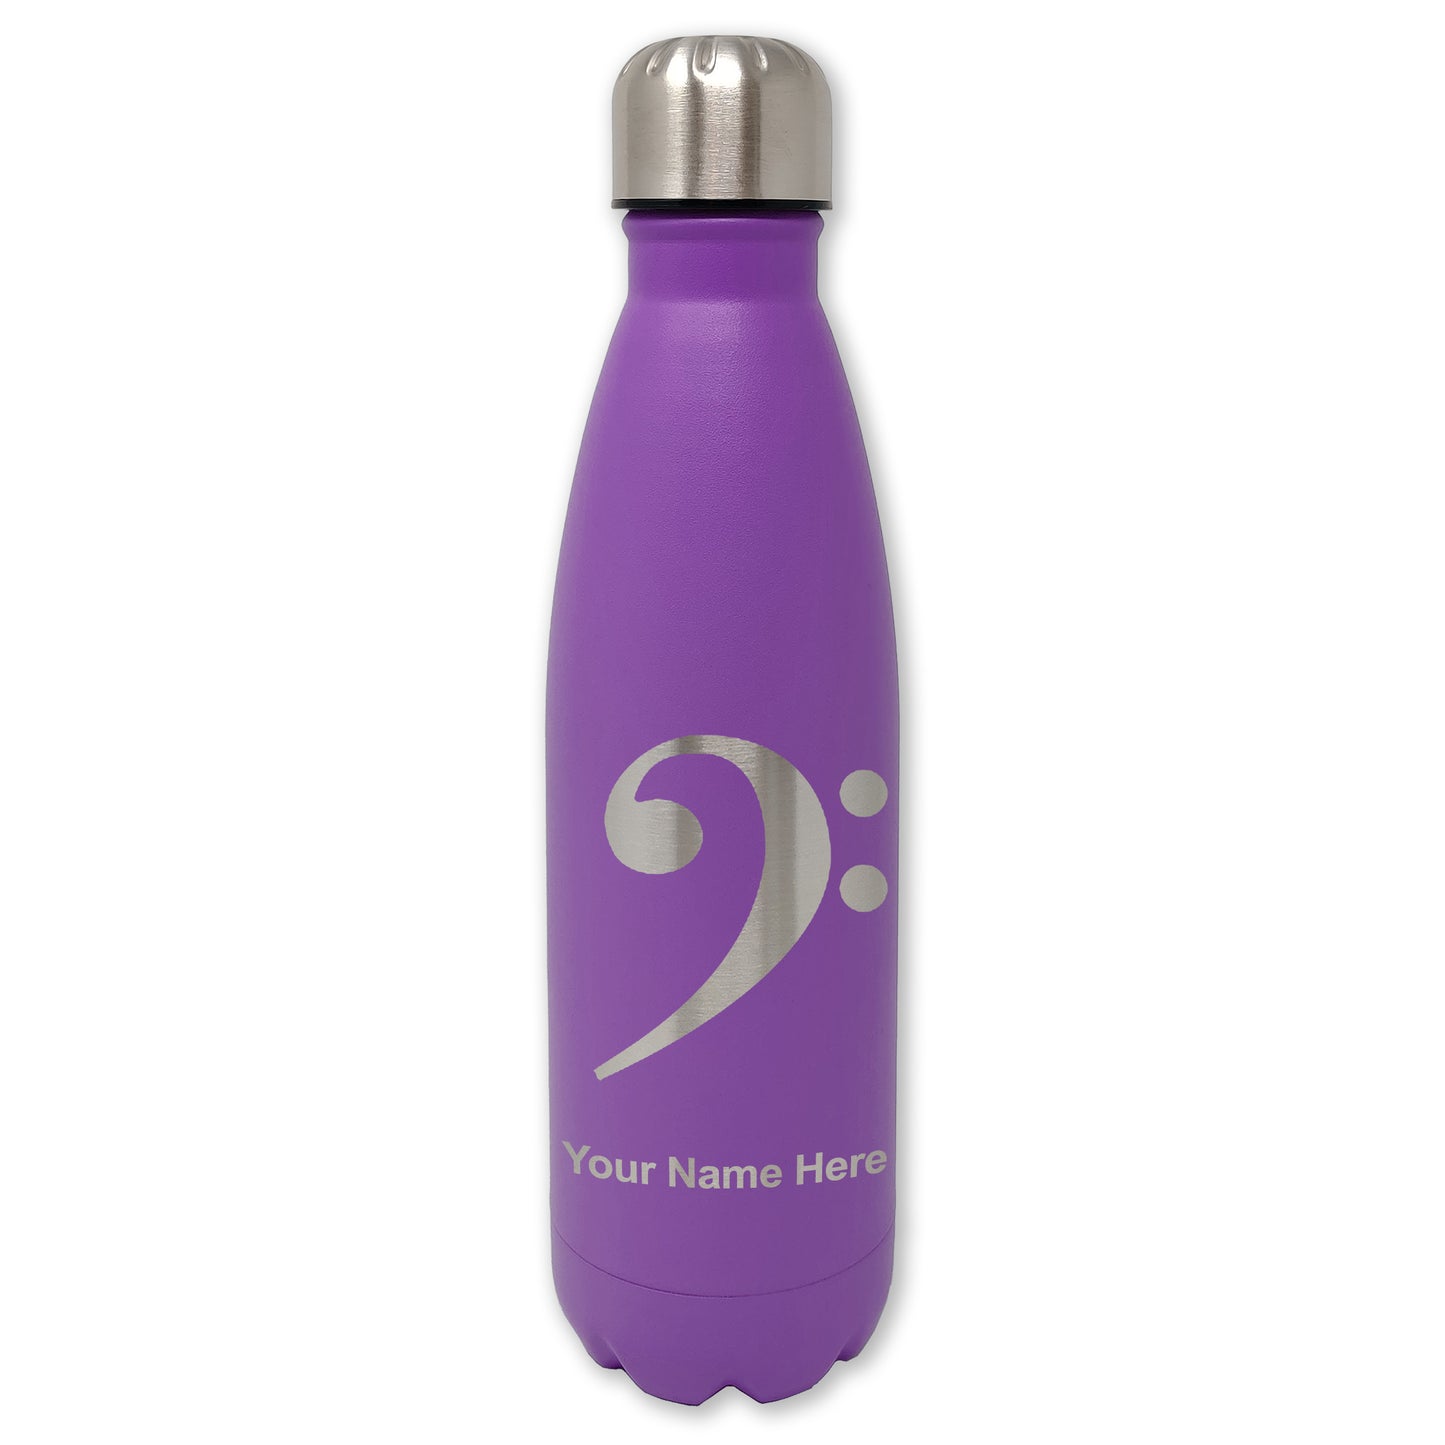 LaserGram Double Wall Water Bottle, Bass Clef, Personalized Engraving Included